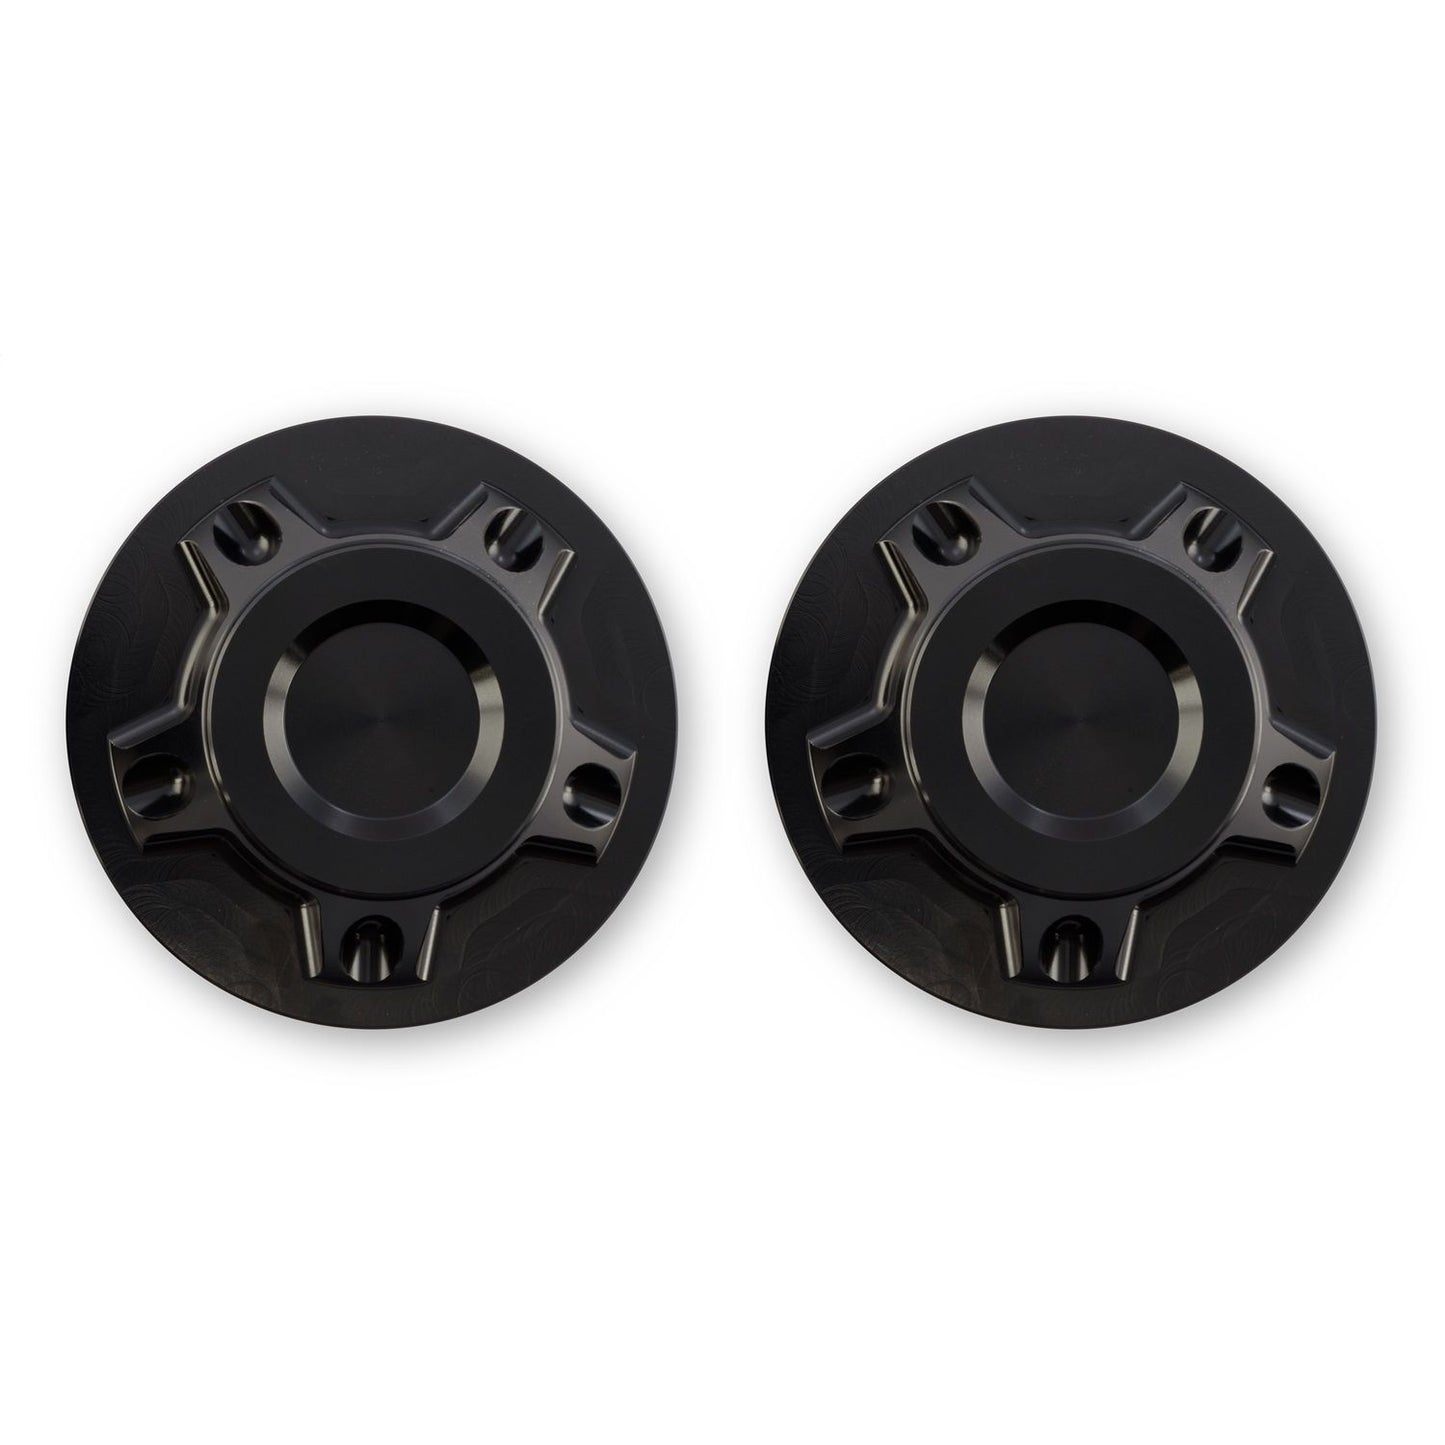 Drake Muscle Strut Bolt Covers CA-280001-BLK